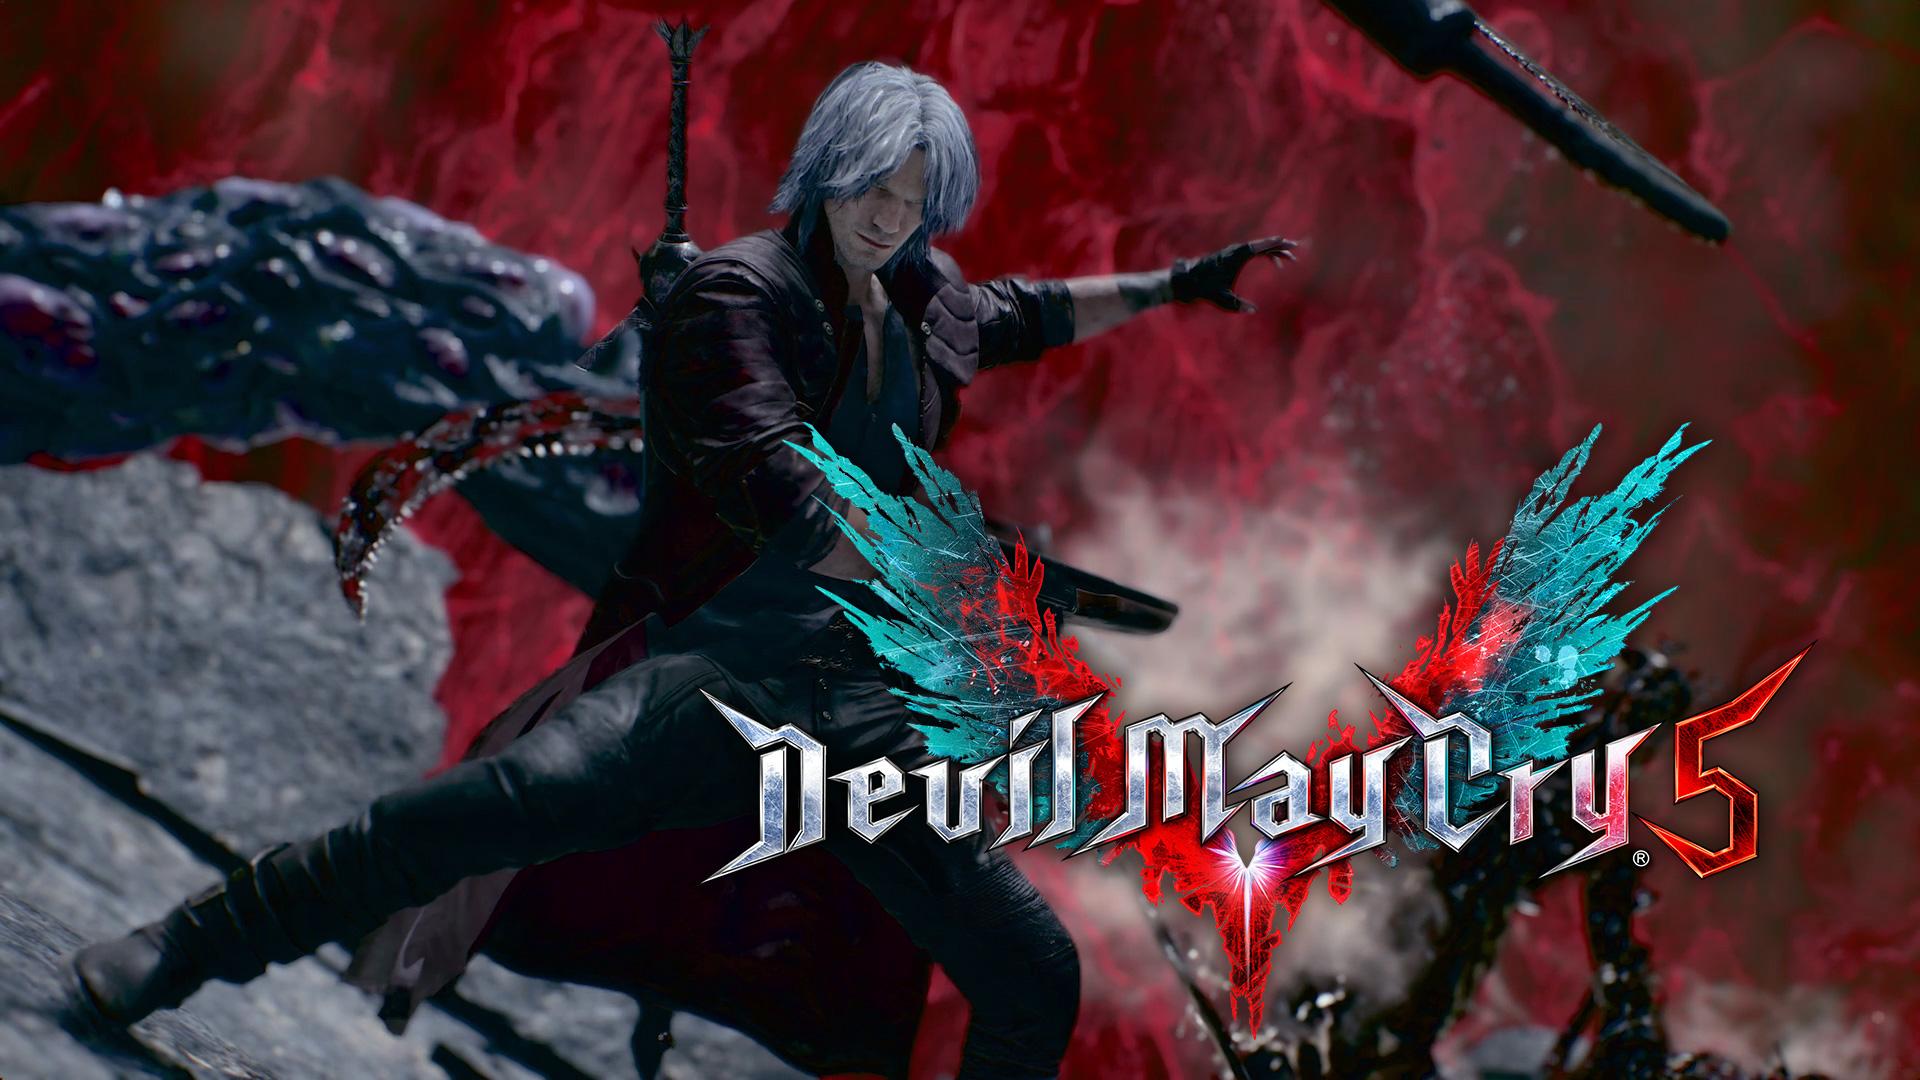 Devil May Cry 5 for Xbox One